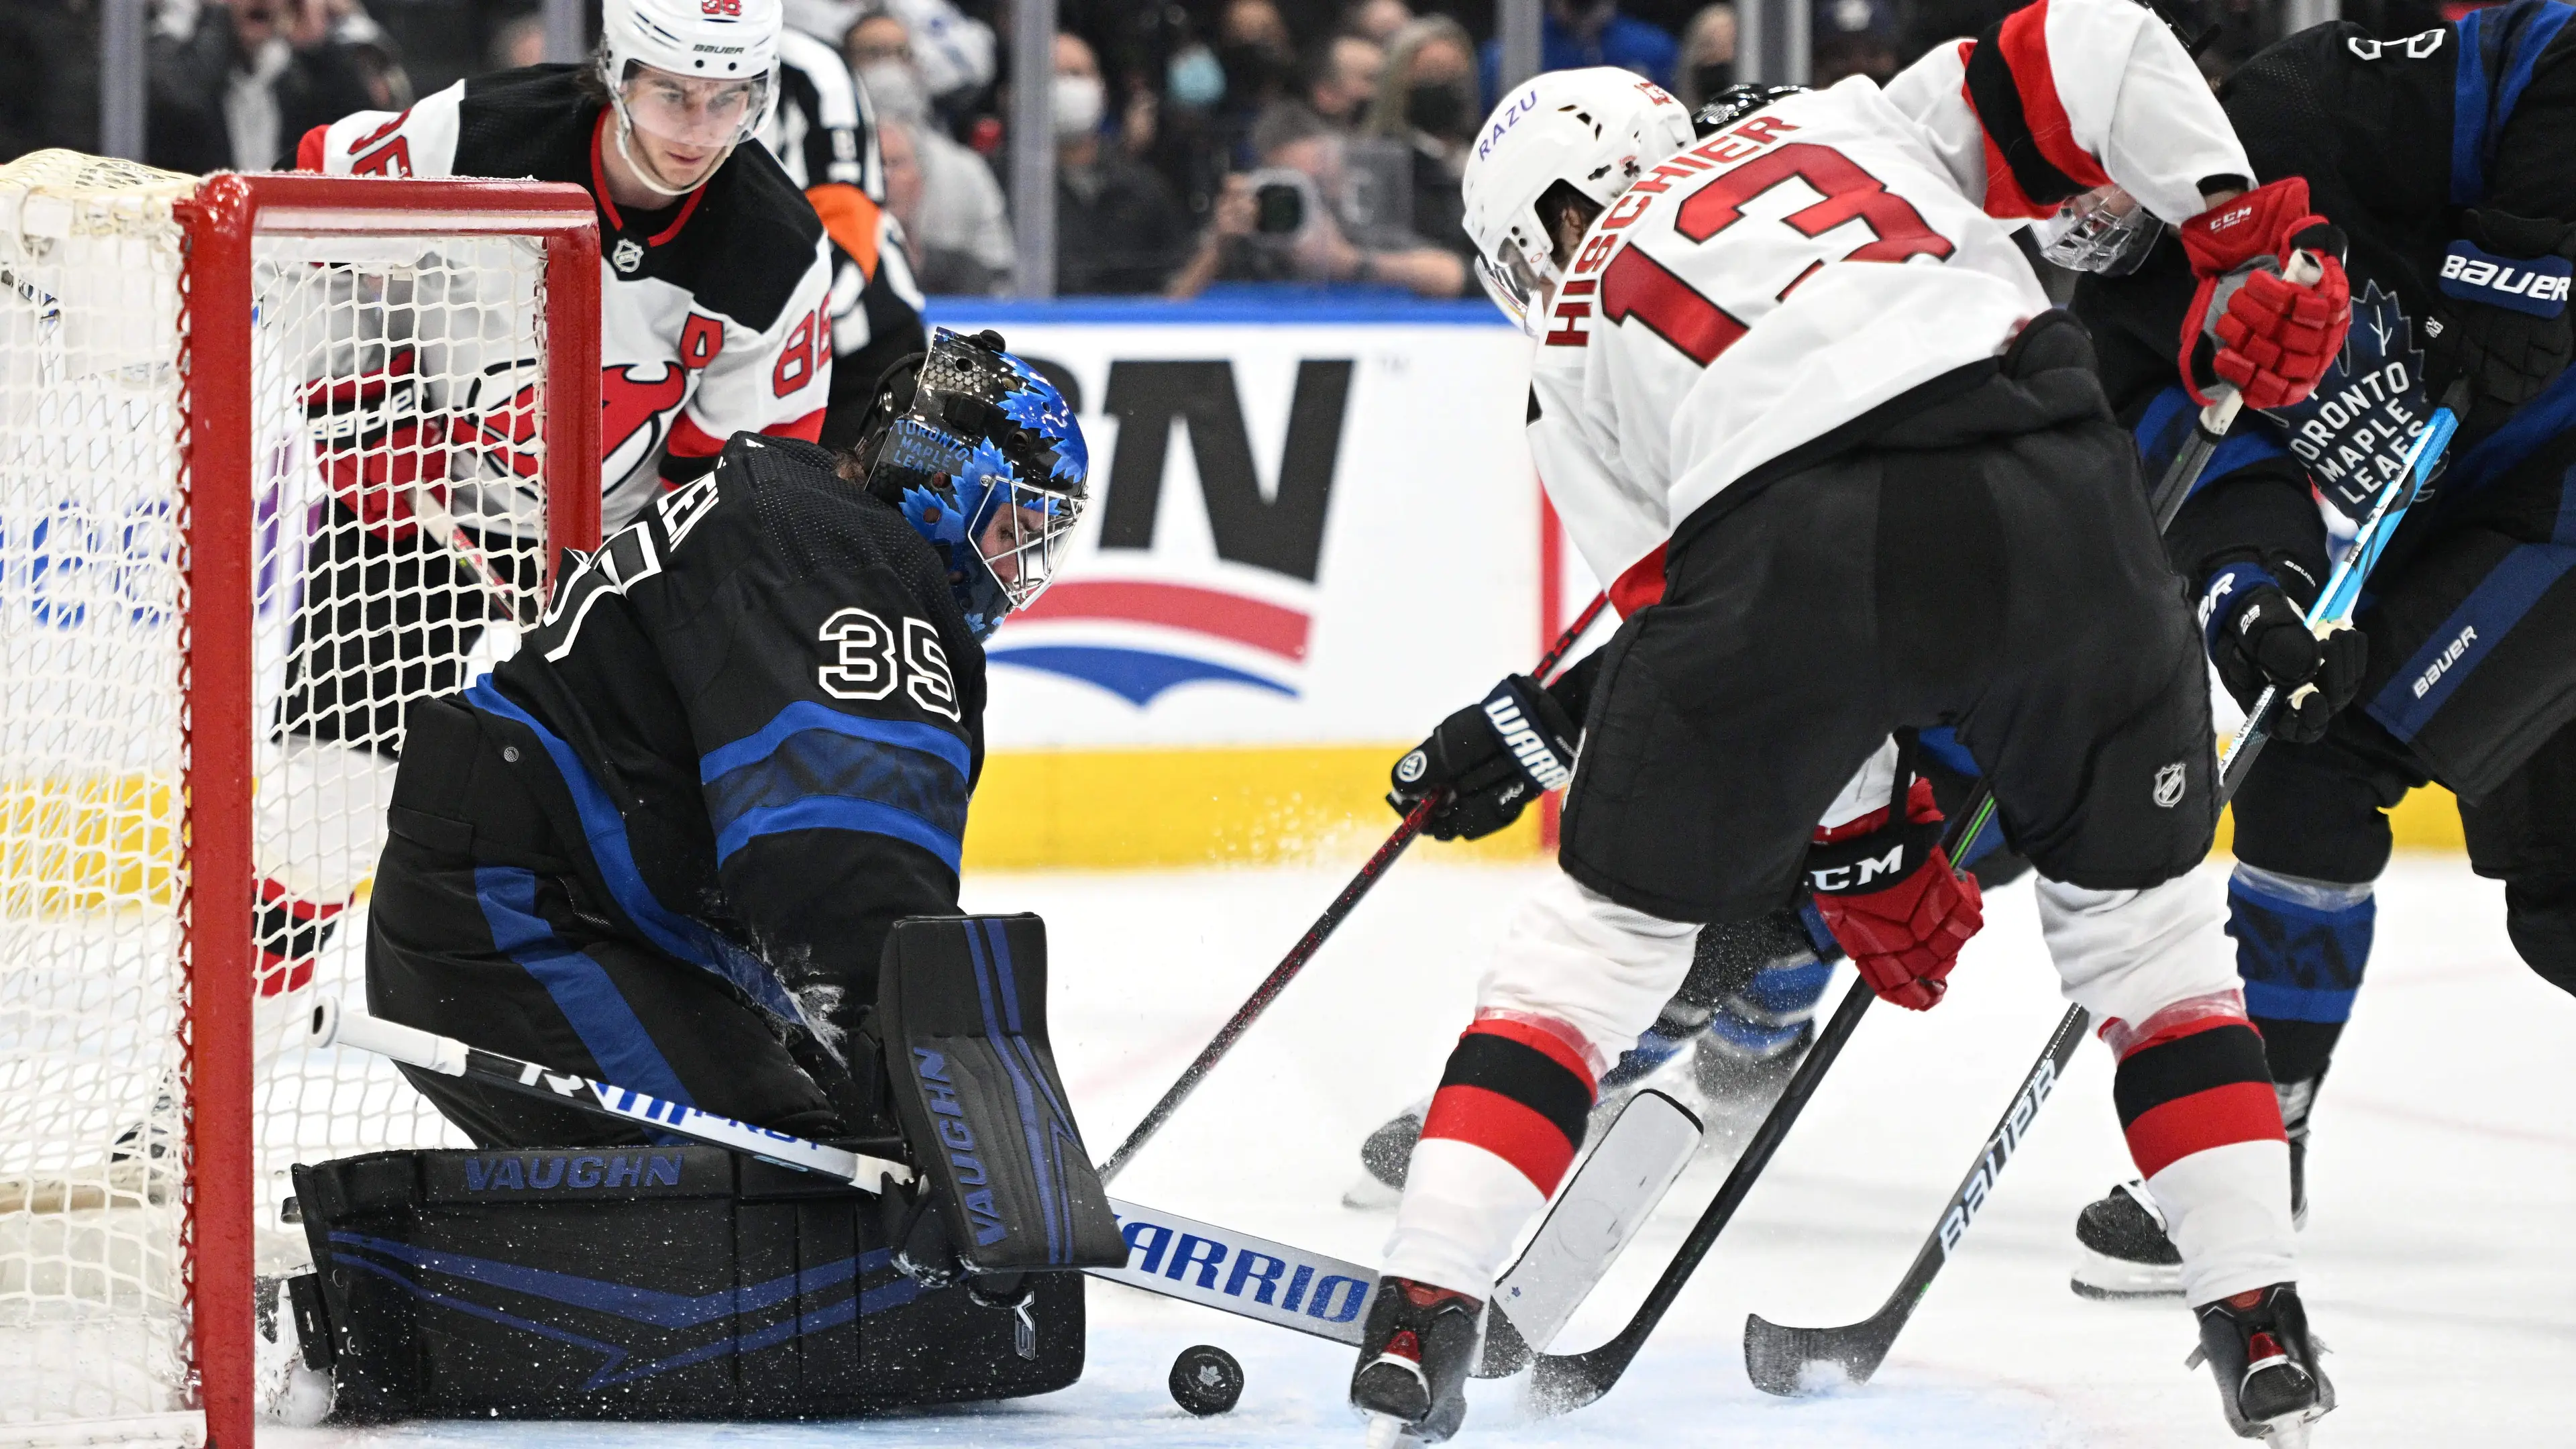 Mar 23, 2022; Toronto, Ontario, CAN; New Jersey Devils forward Nico Hischier (13) scores against Toronto Maple Leafs goalie Petr Mrazek (35) in the second period at Scotiabank Arena. / Dan Hamilton-USA TODAY Sports